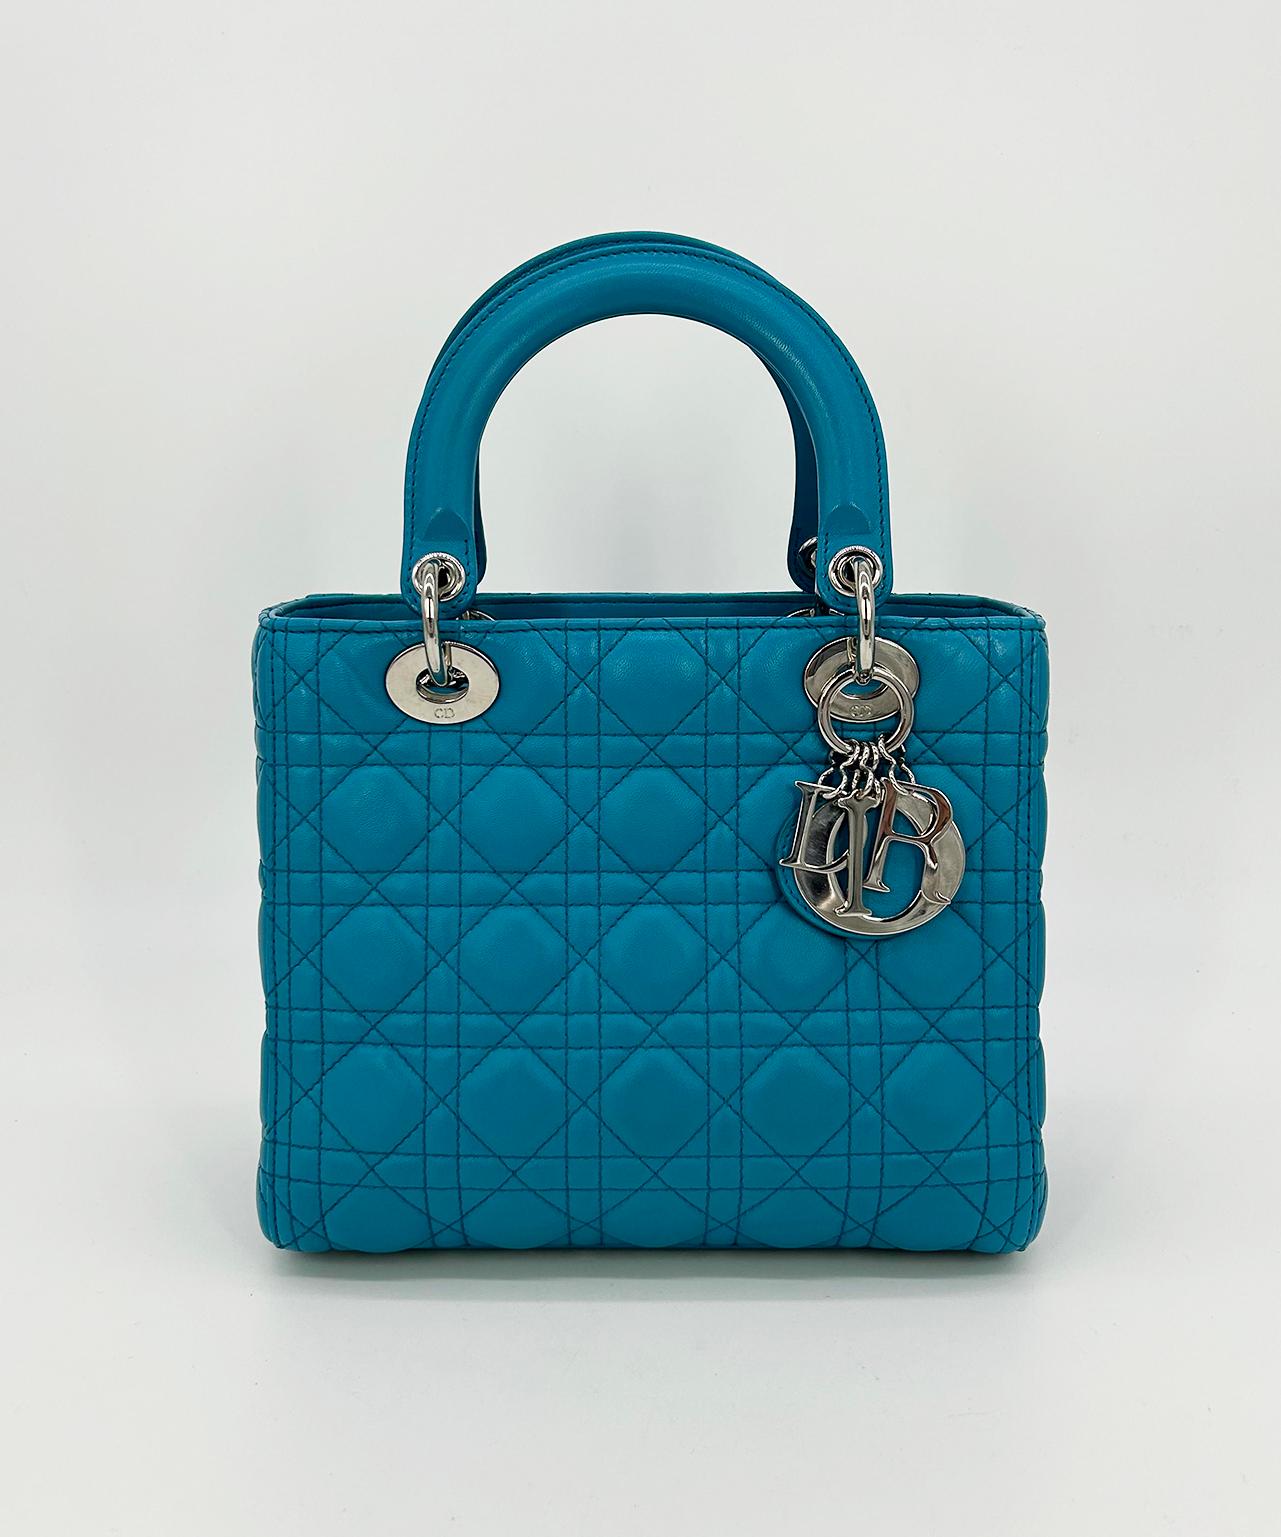 Christian Dior Teal Leather Medium Lady Di Bag in excellent condition. Teal cannage quilted lambskin leather exterior trimmed with sparkling silver hardware. Double top handles. Removable matching leather shoulder strap easily converts between hand